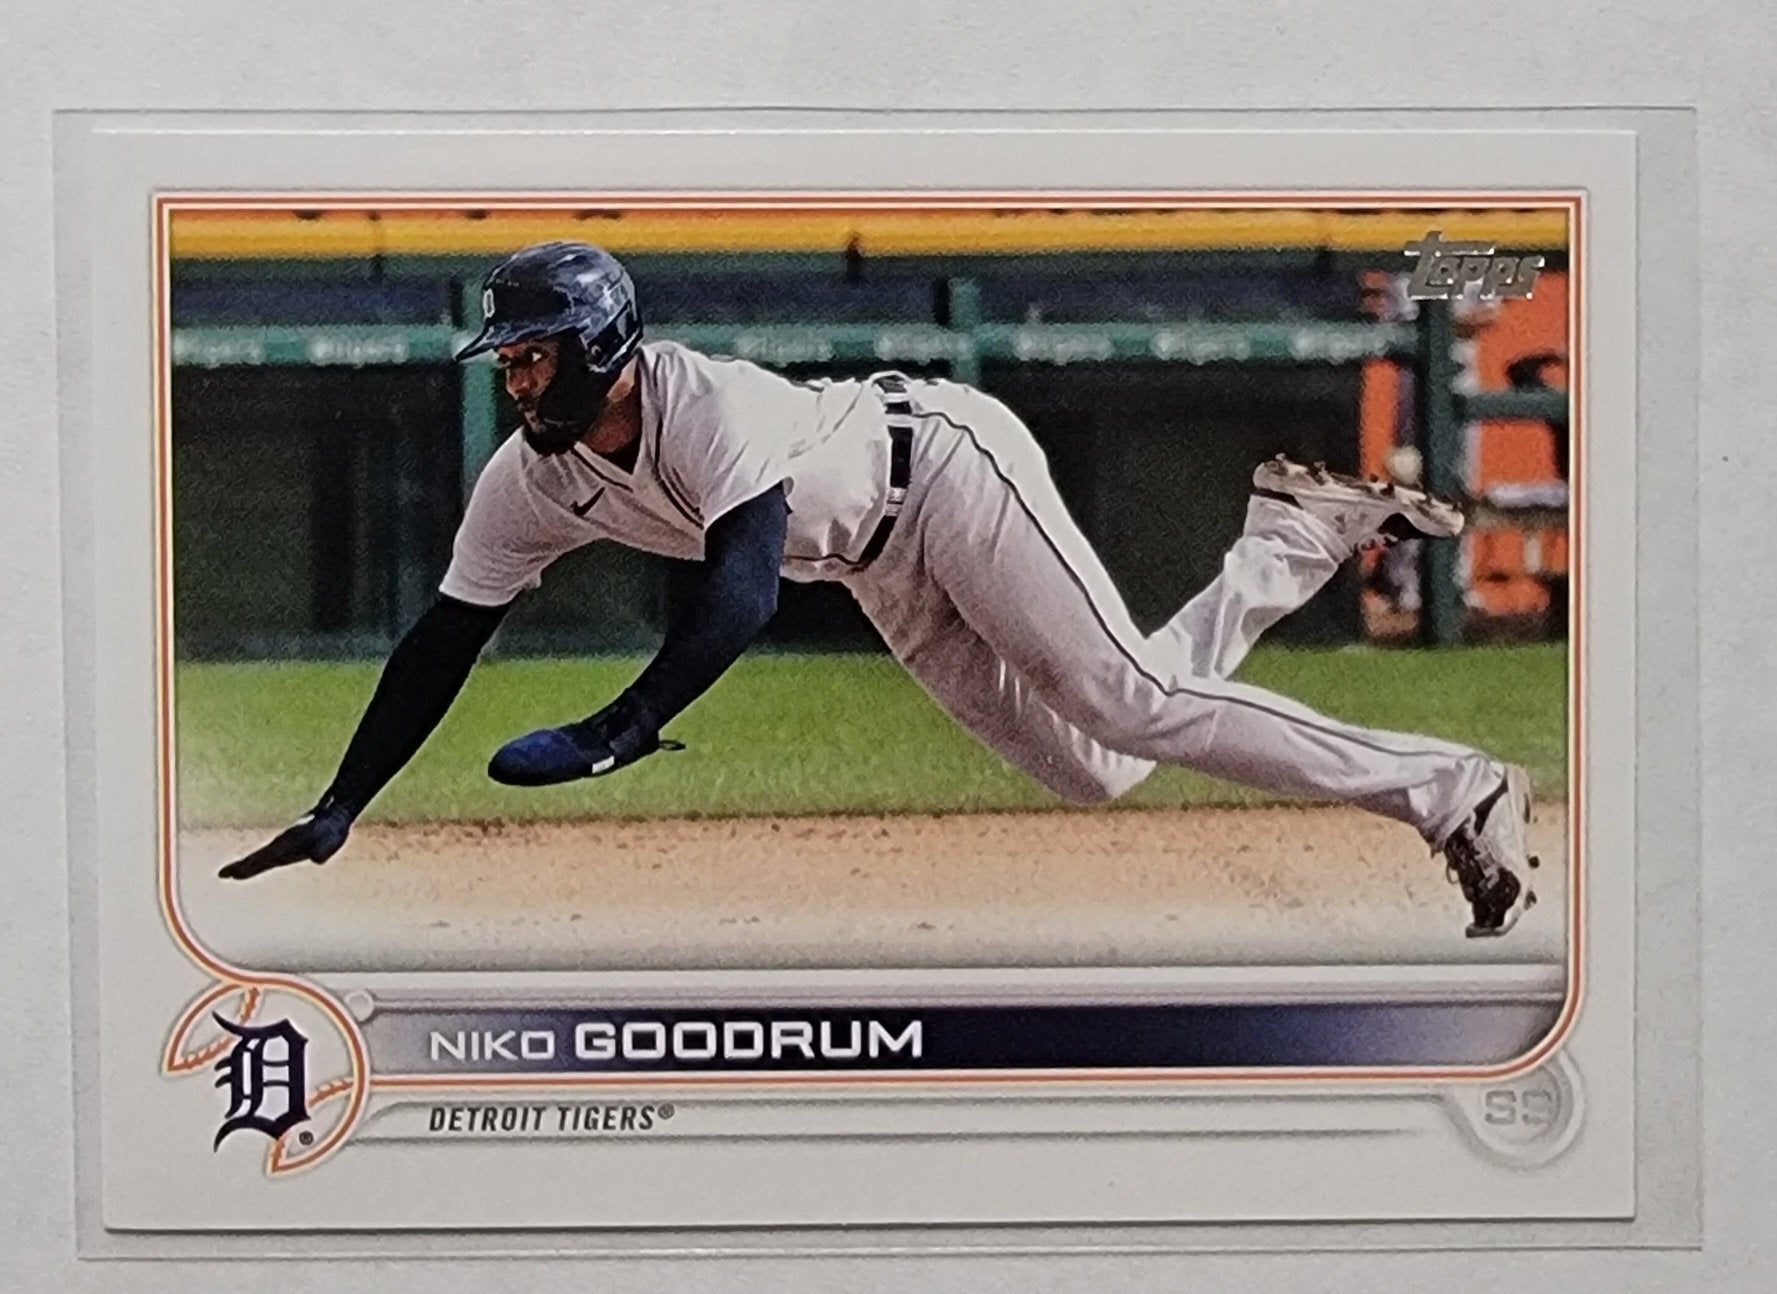 2022 Topps Series 2 Niko Goodrum Baseball Card AVM1 simple Xclusive Collectibles   